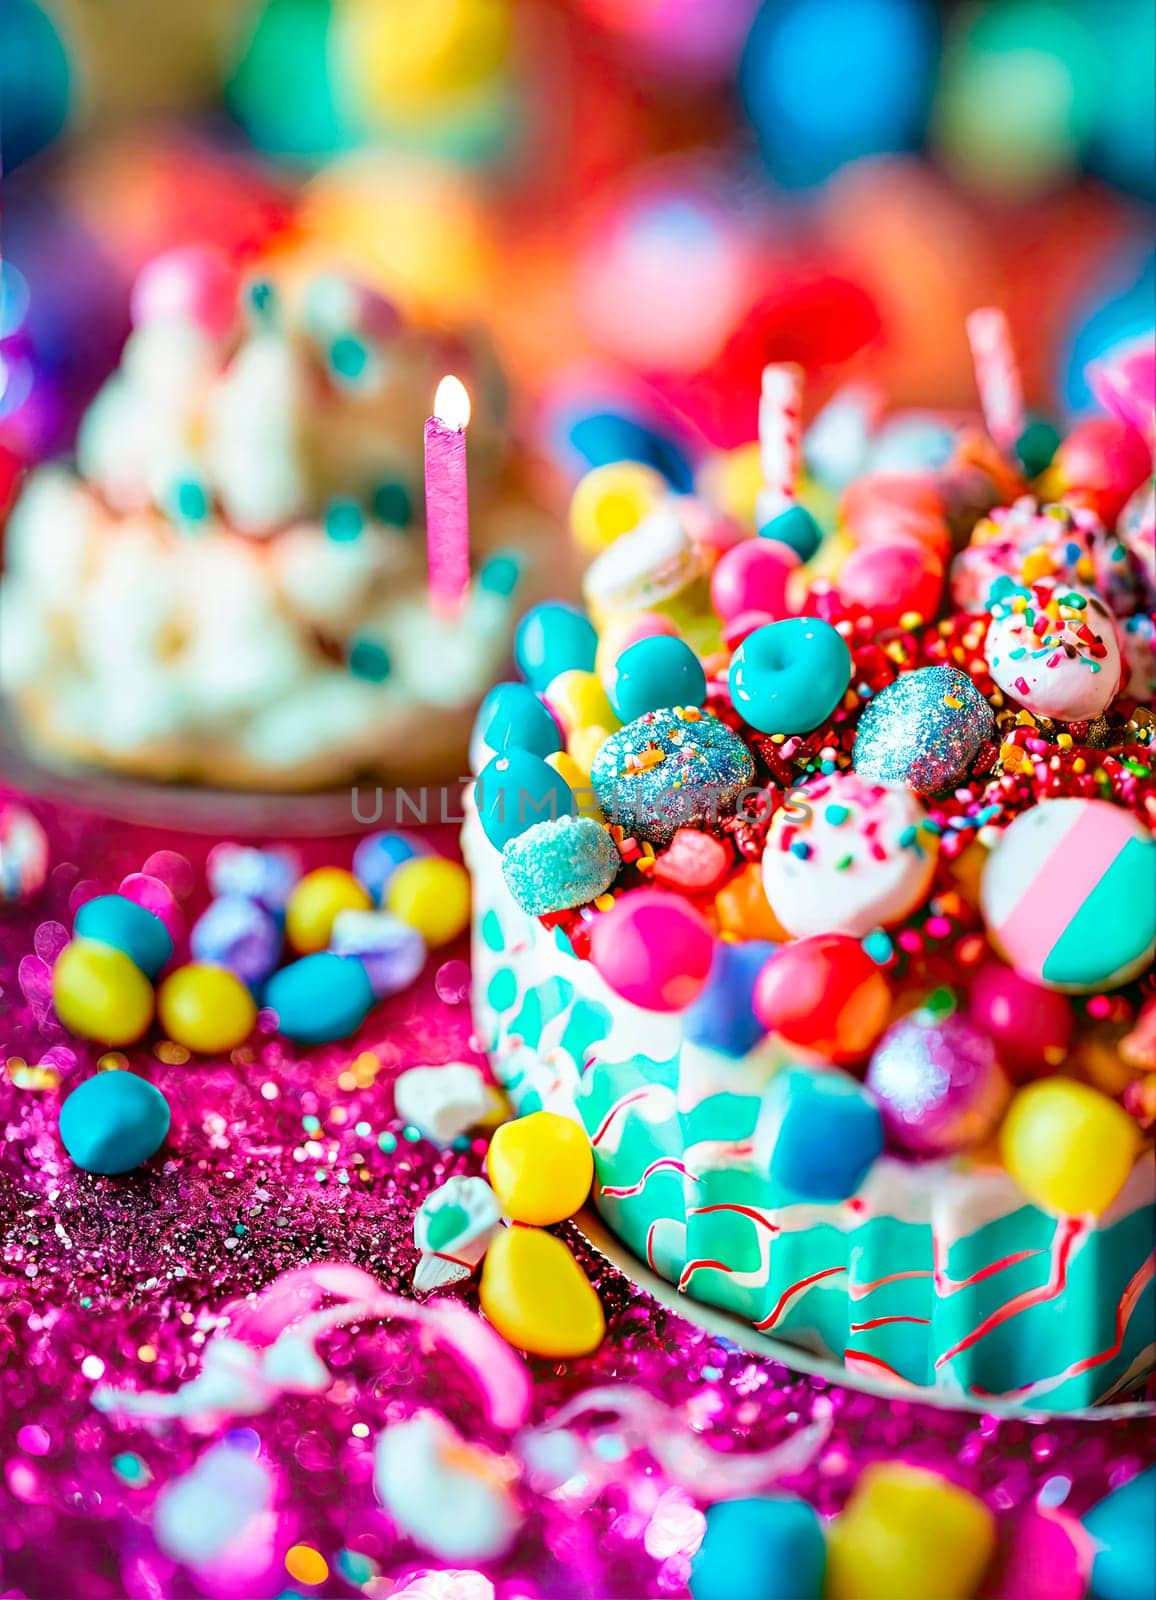 candy sweets and birthday cake. selective focus. by yanadjana